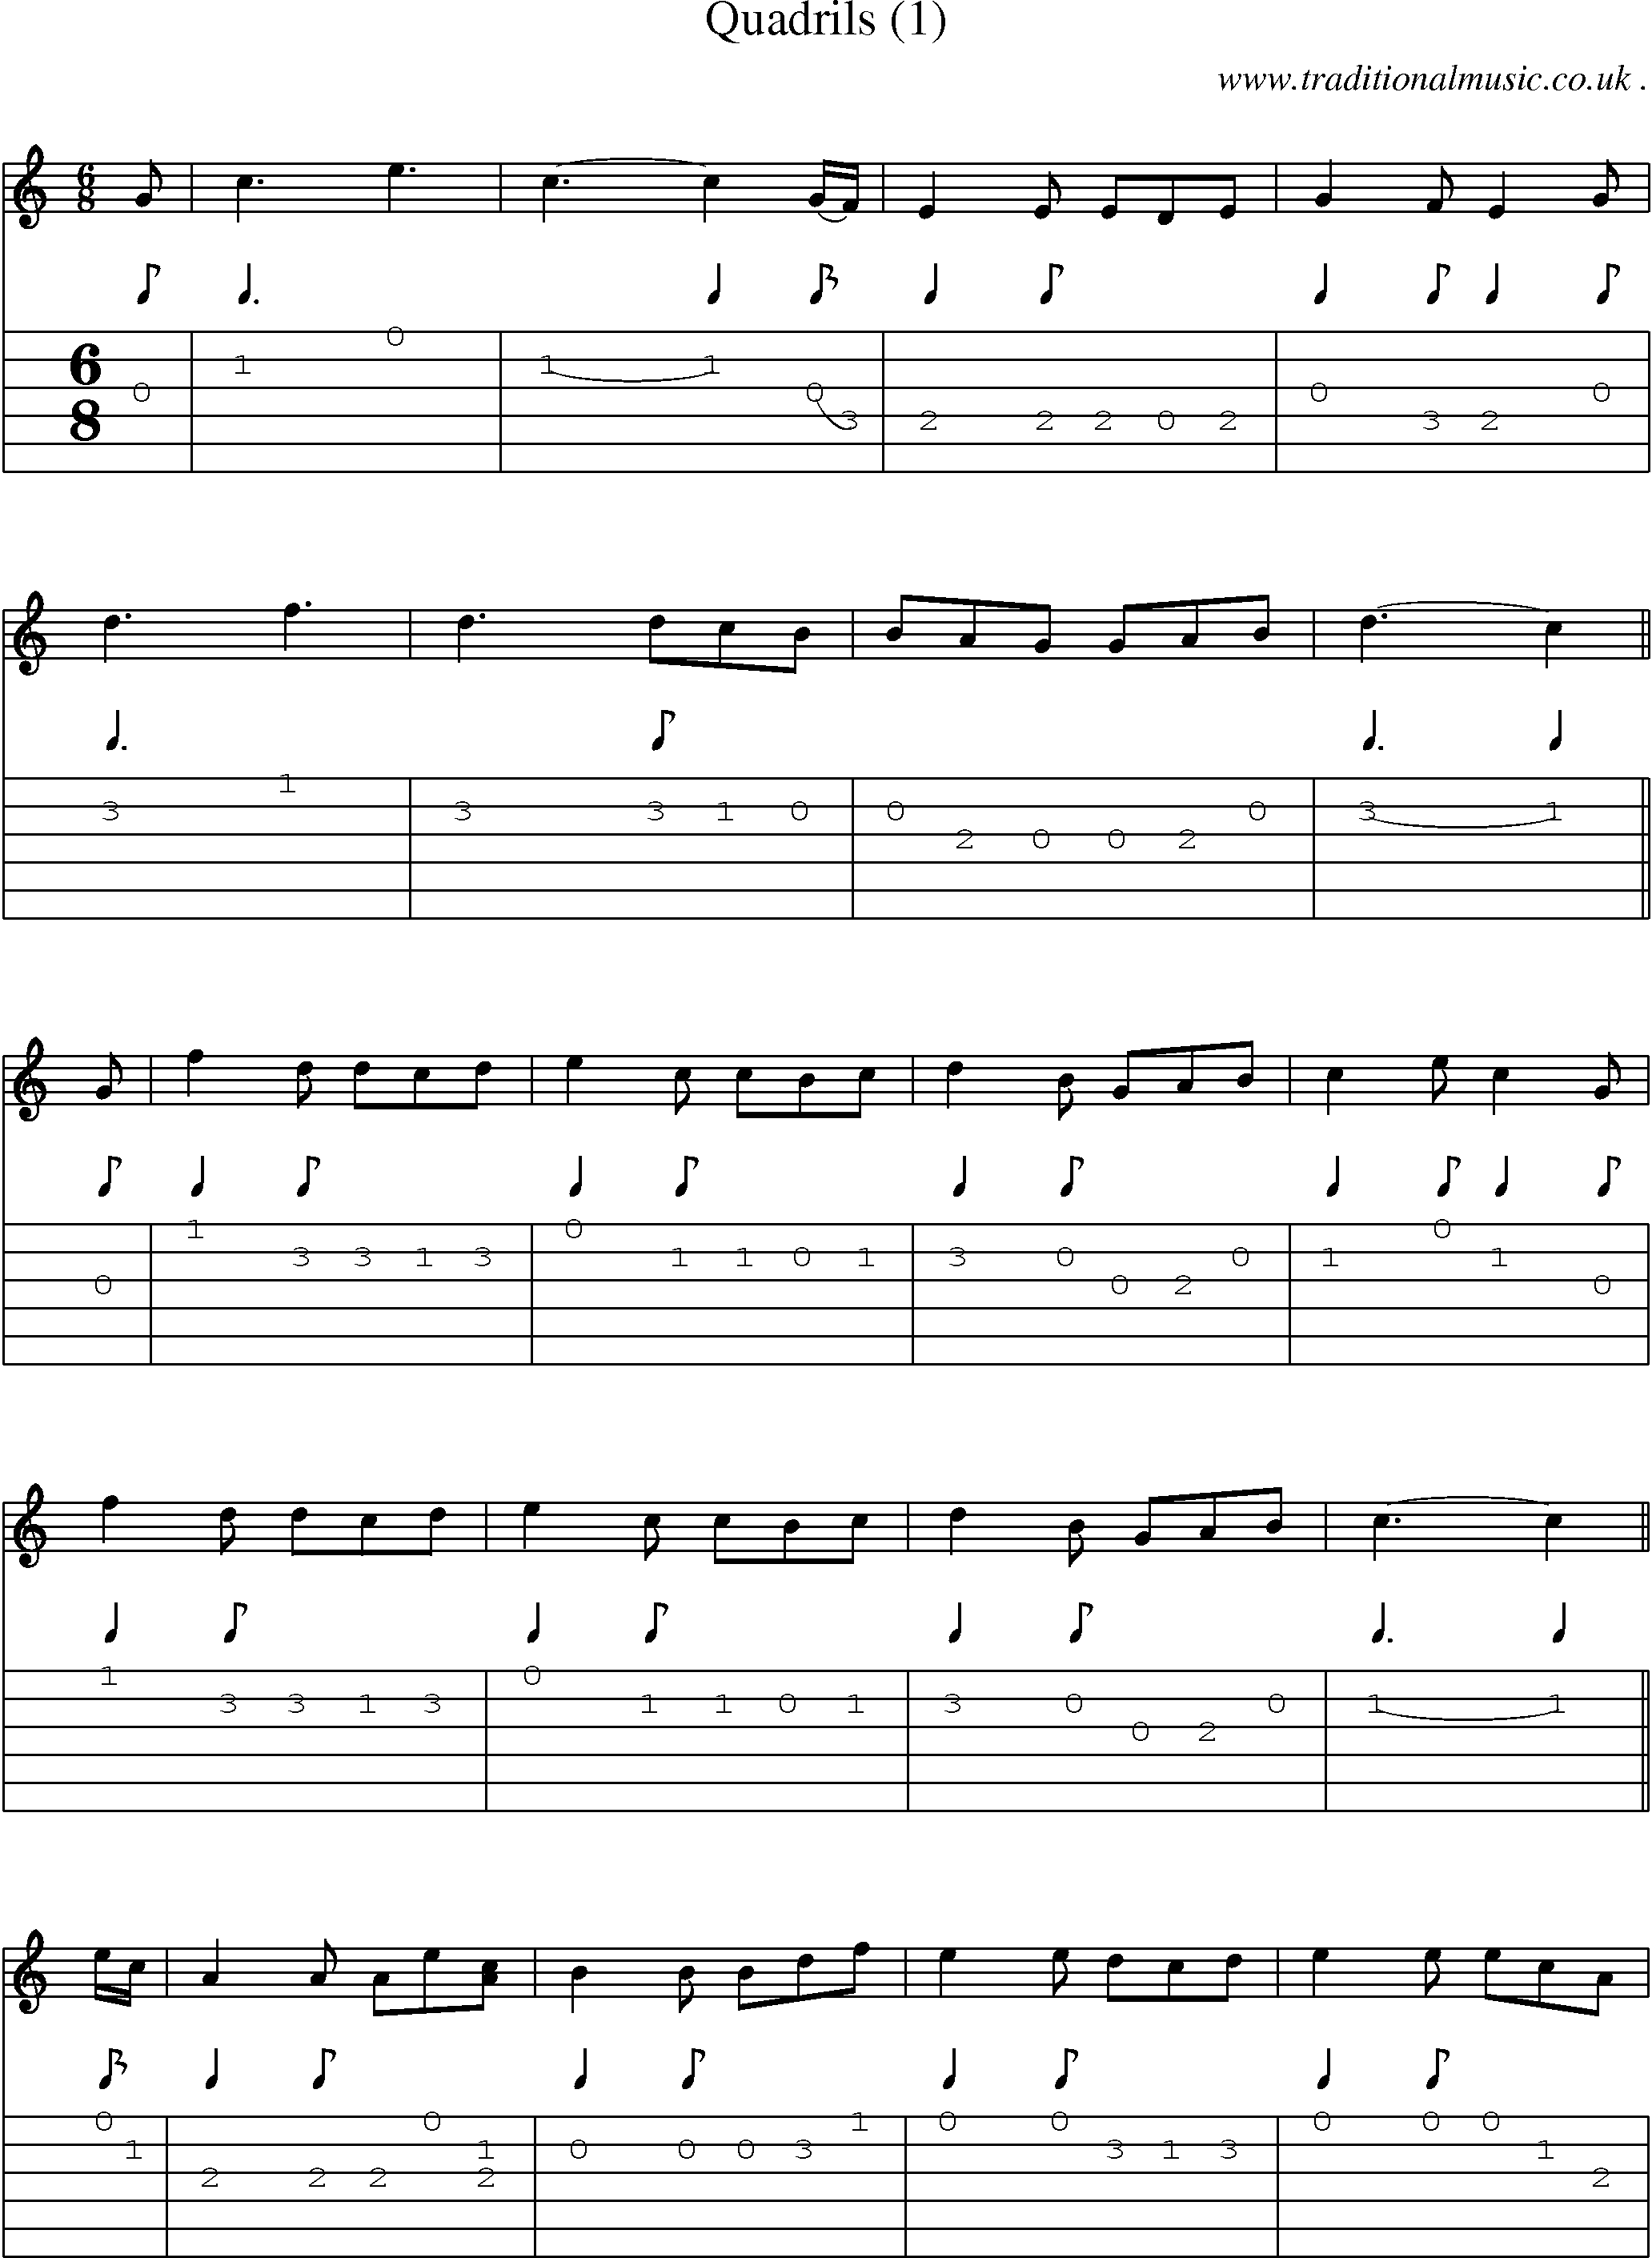 Sheet-Music and Guitar Tabs for Quadrils (1)